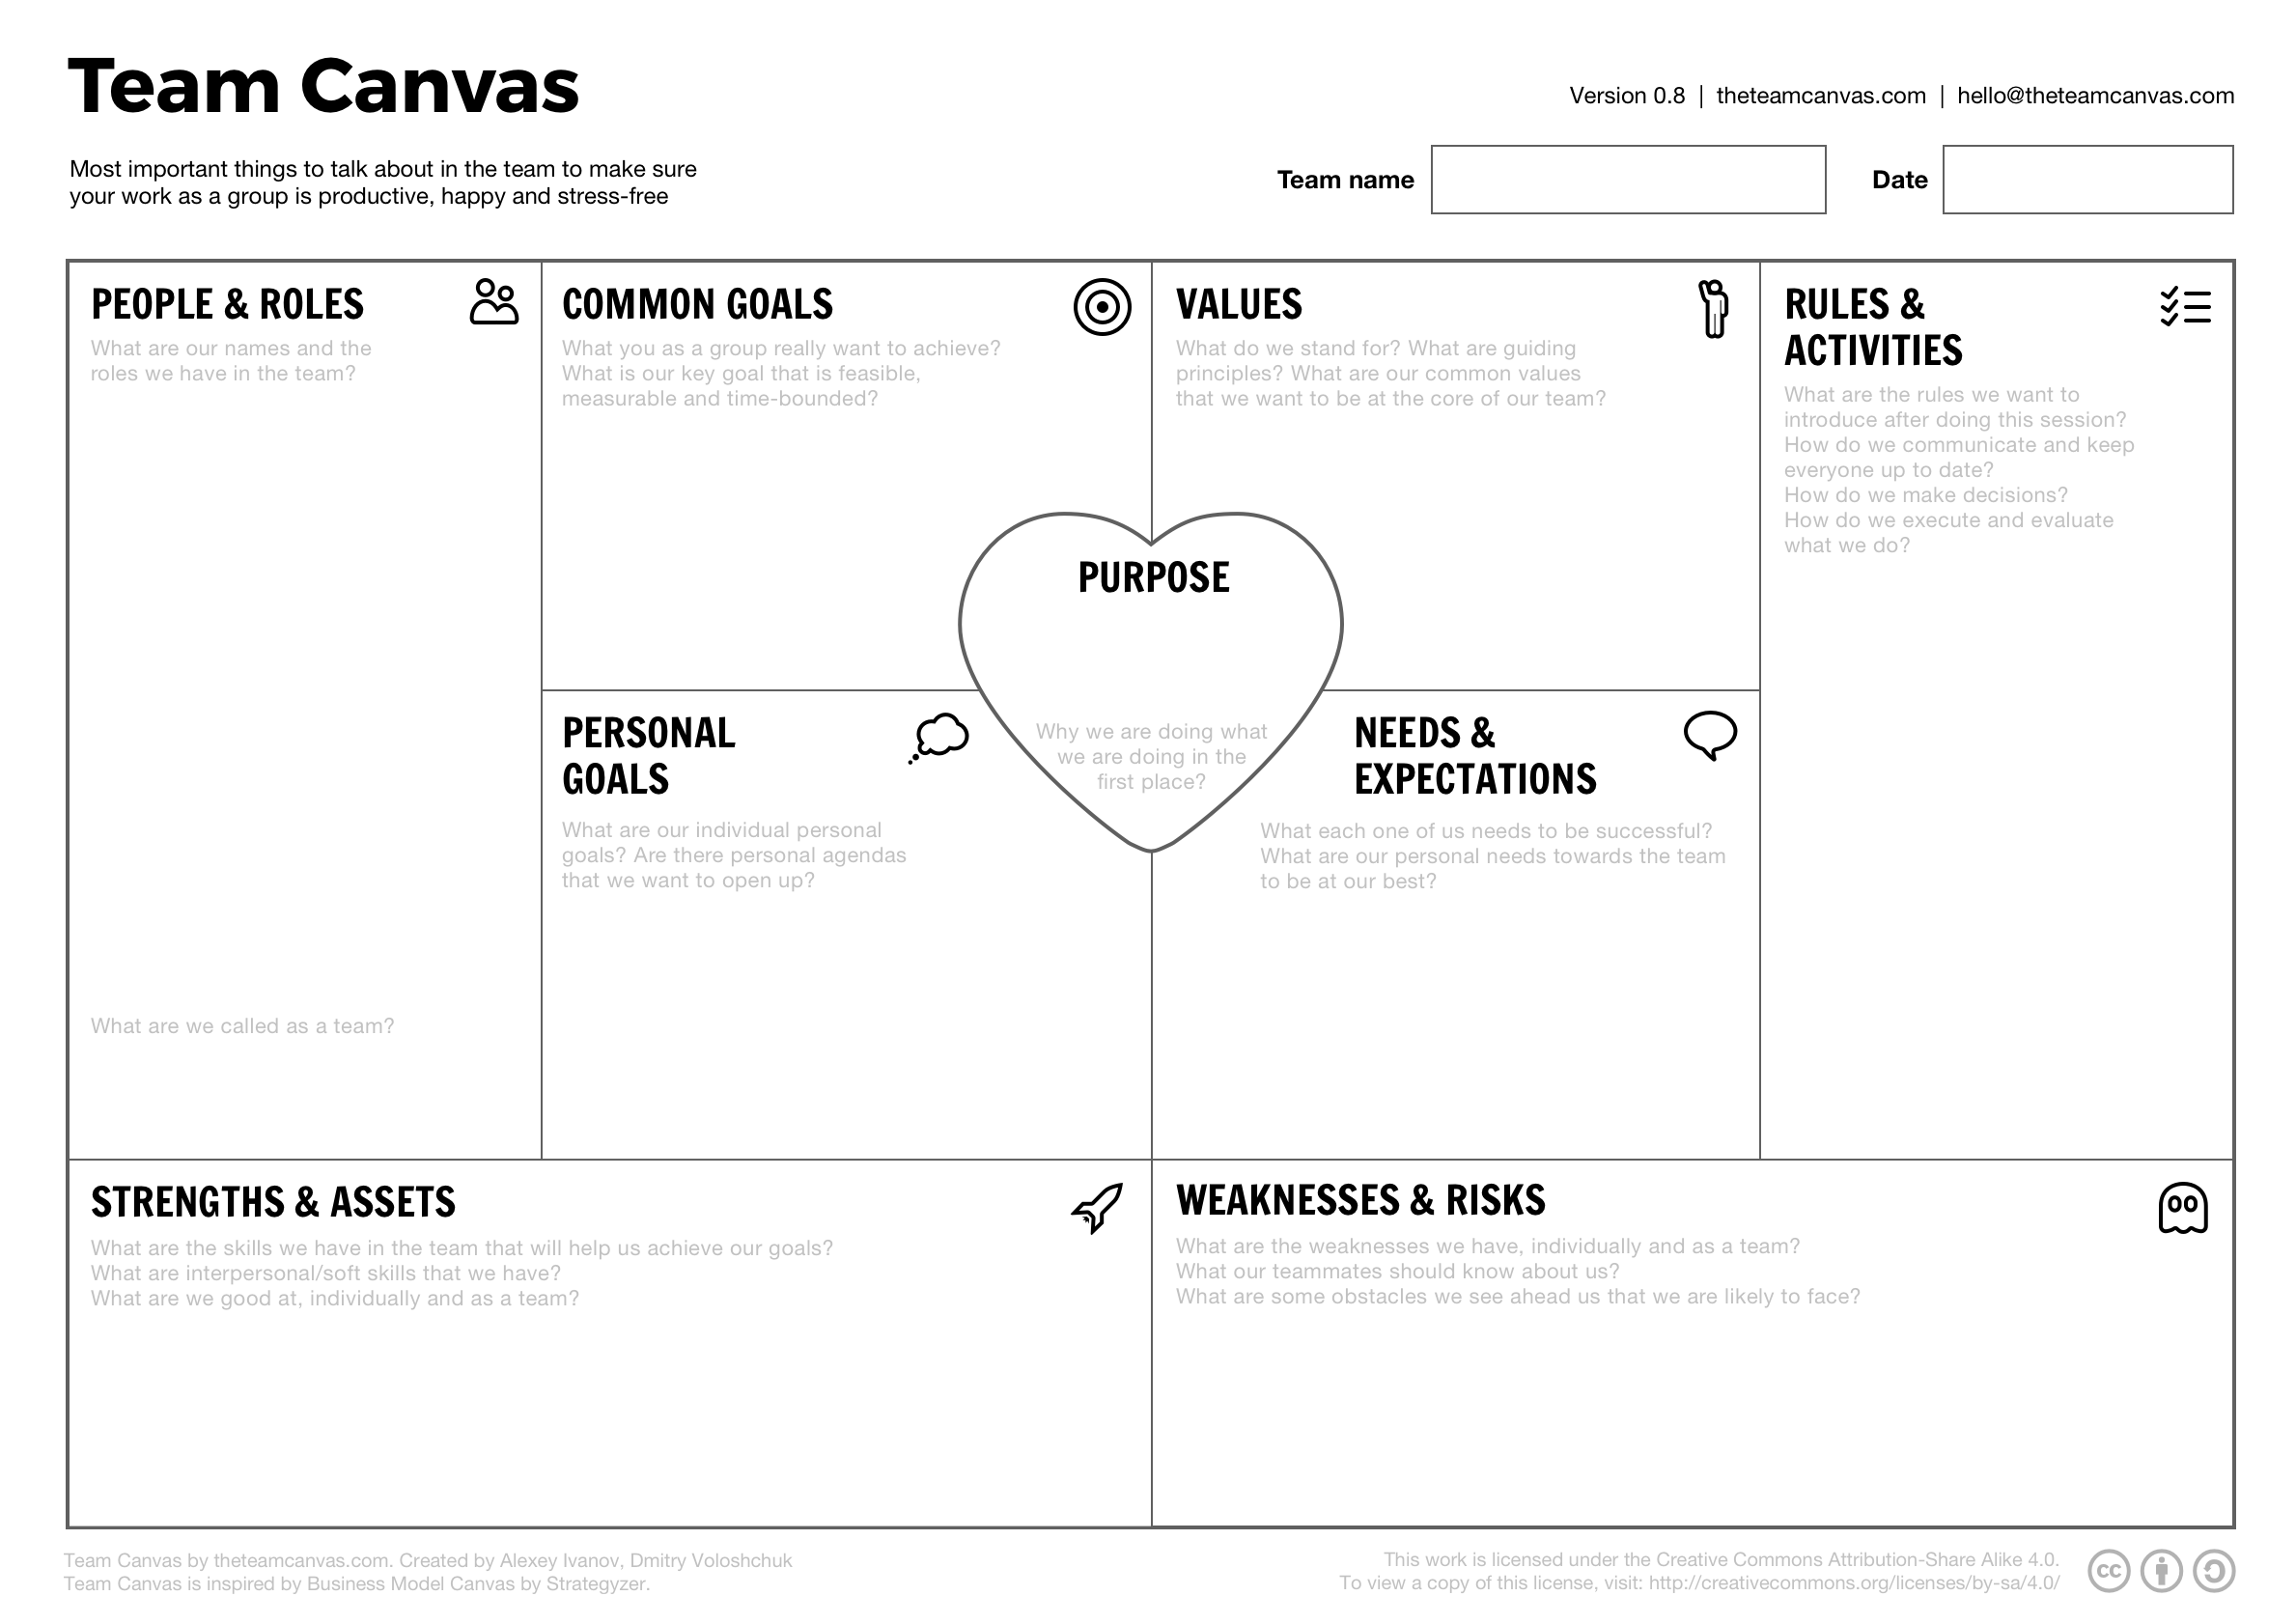 Team Canvas - Get Your Team on the Same Page